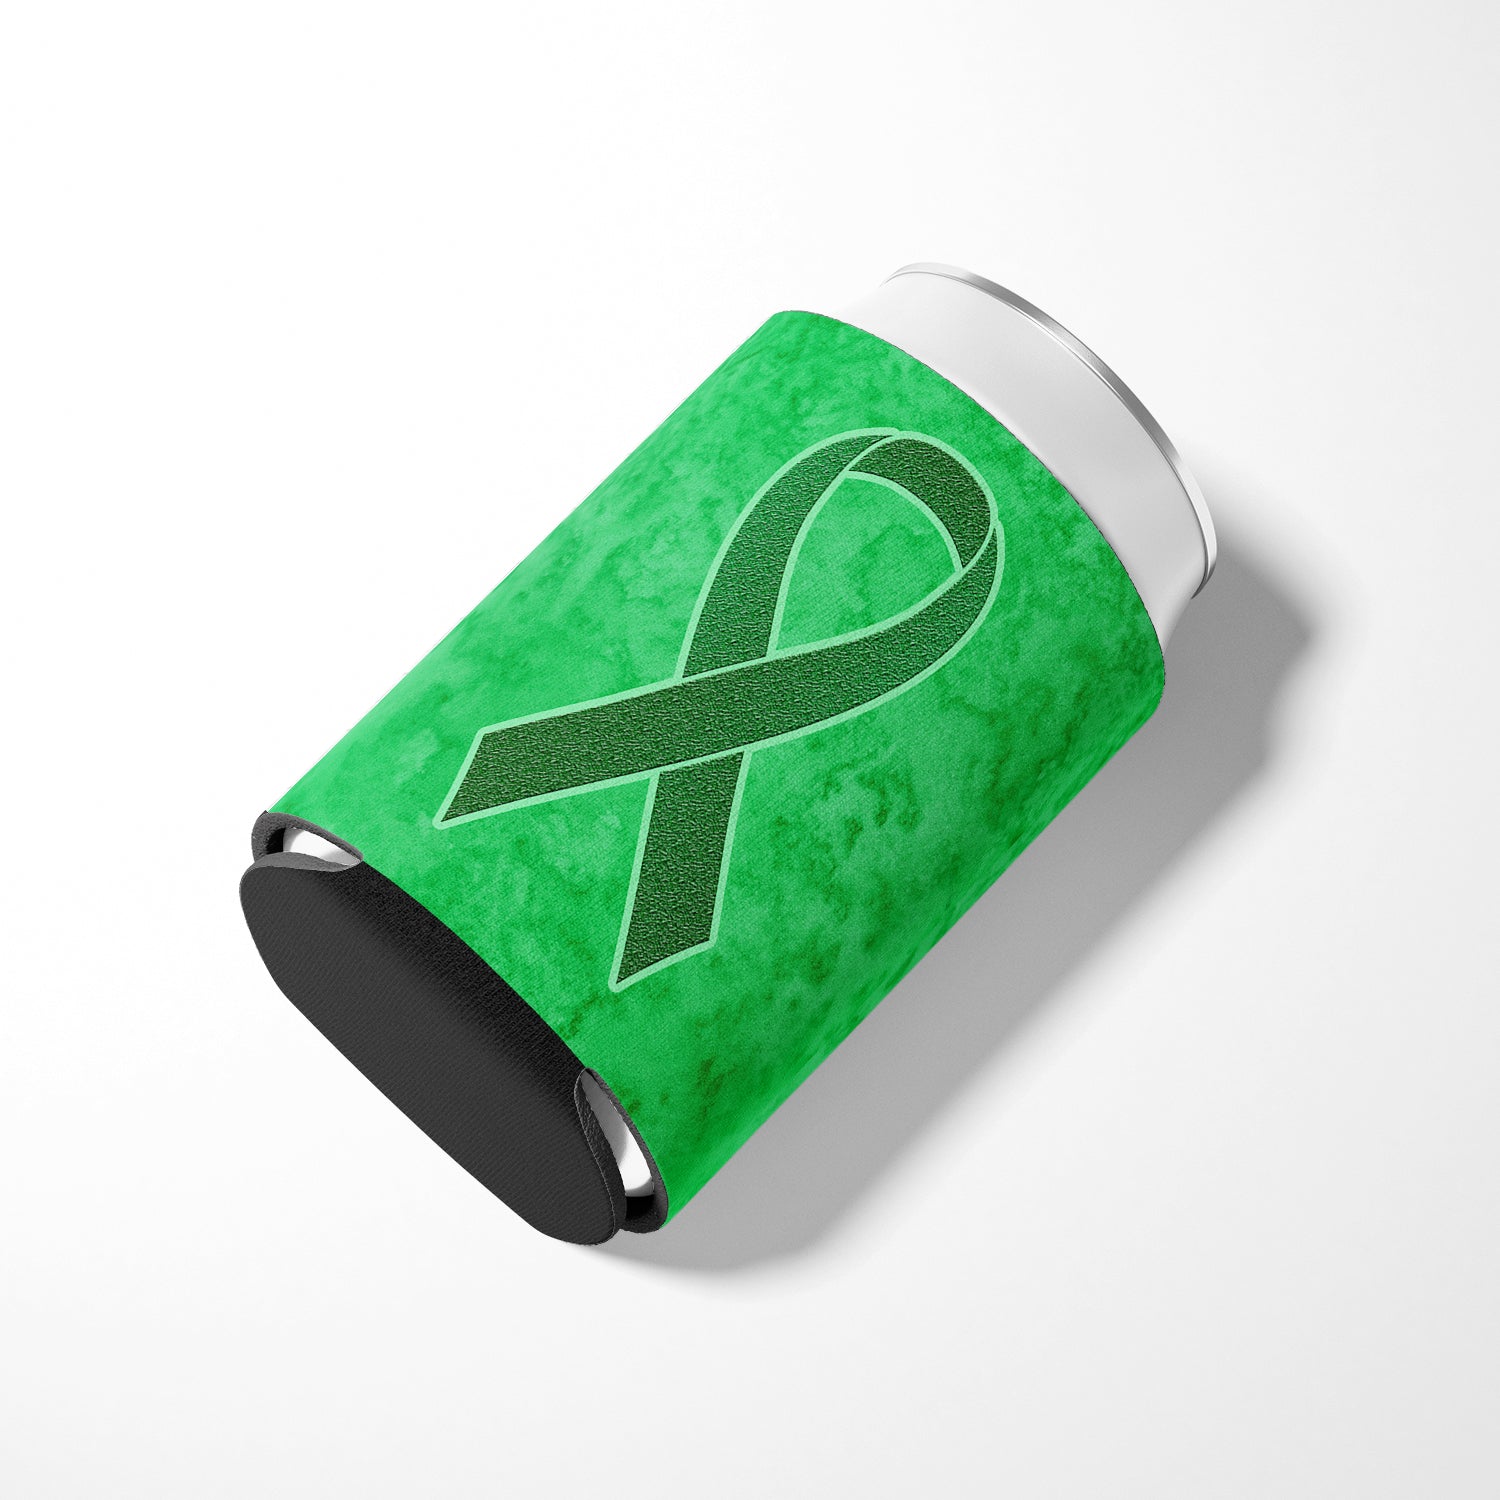 Kelly Green Ribbon for Kidney Cancer Awareness Can or Bottle Hugger AN1220CC.